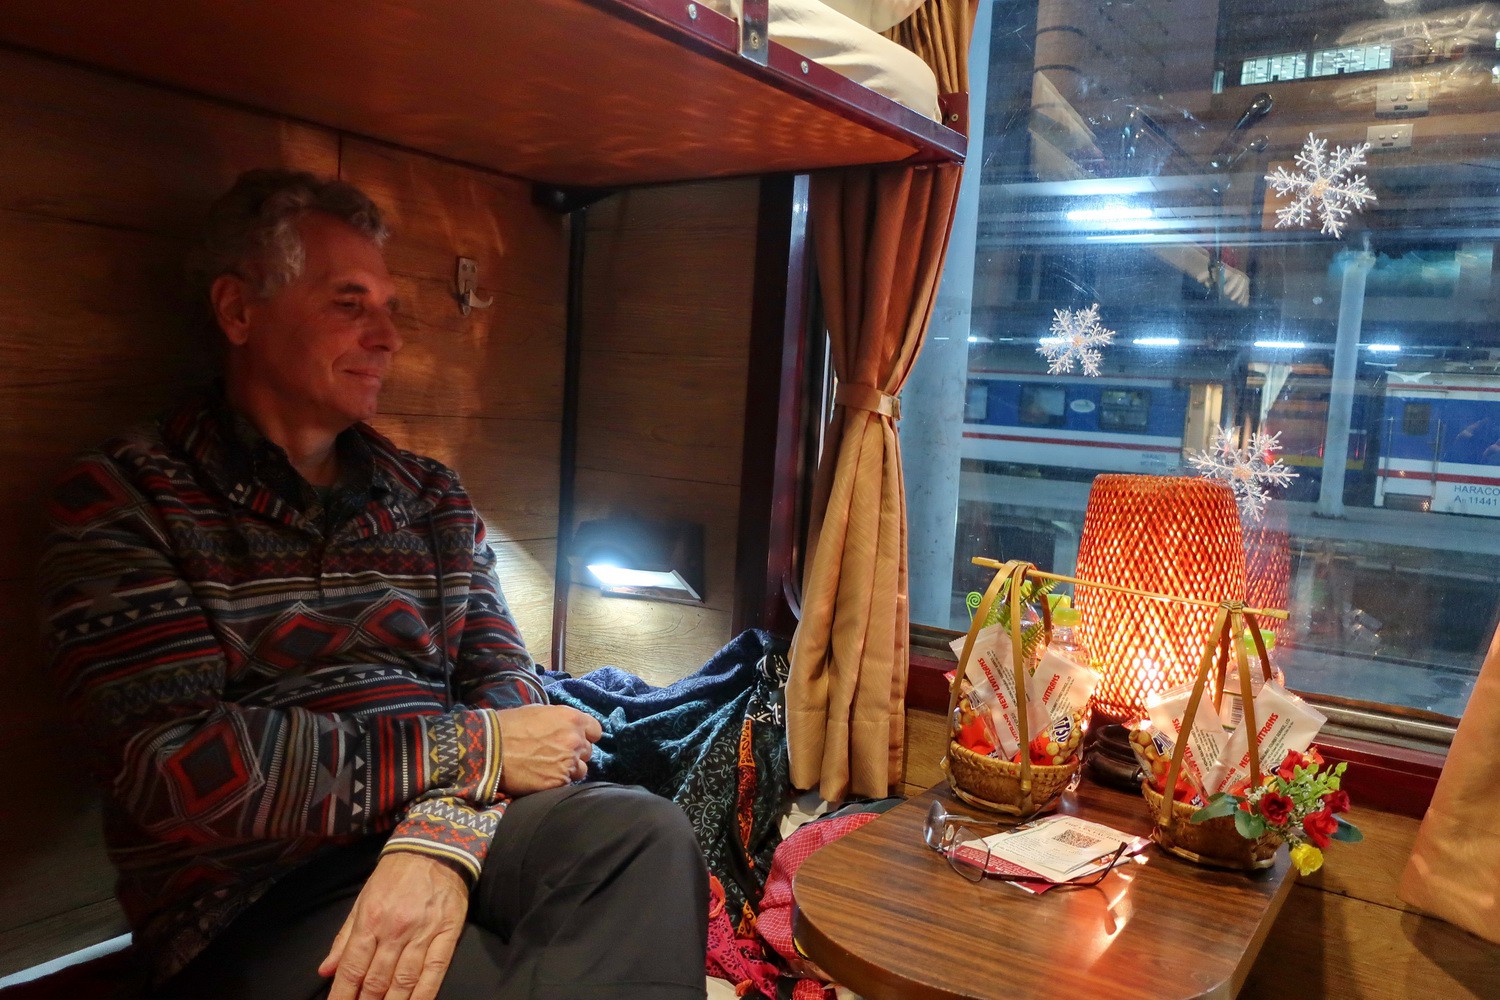 Alfred in the night train from Hanoi to Lao Cai